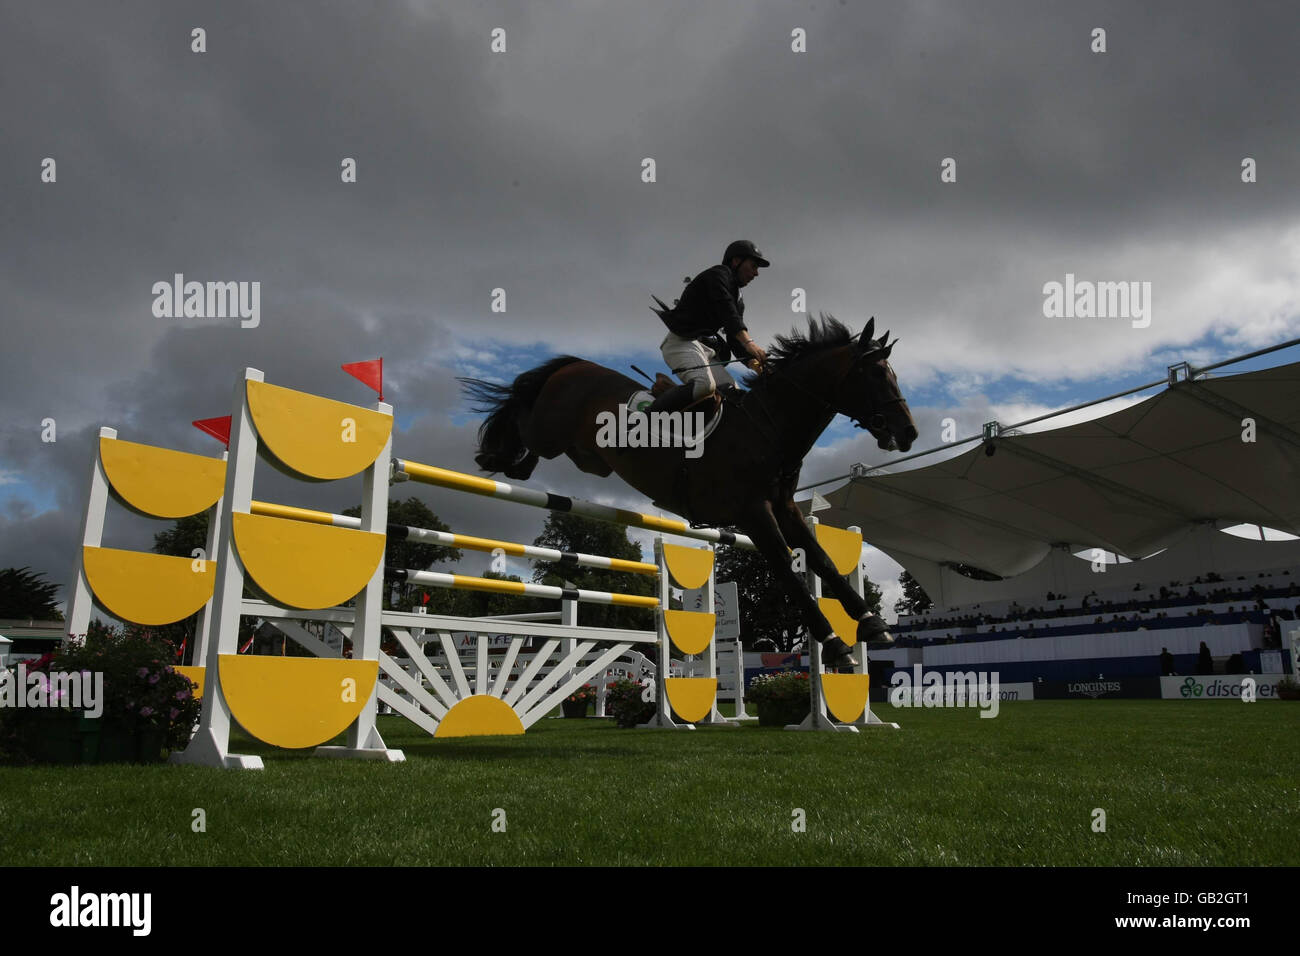 Jockey Dermot Lennon riding Lanceretto in the Irish Sports Council Classic at The Failte Ireland Dublin Horse Show that gets under way at the RDS Showgrounds. The show runs from August 6-10 and includes the Aga Khan Challenge Trophy on Friday Evening. Stock Photo